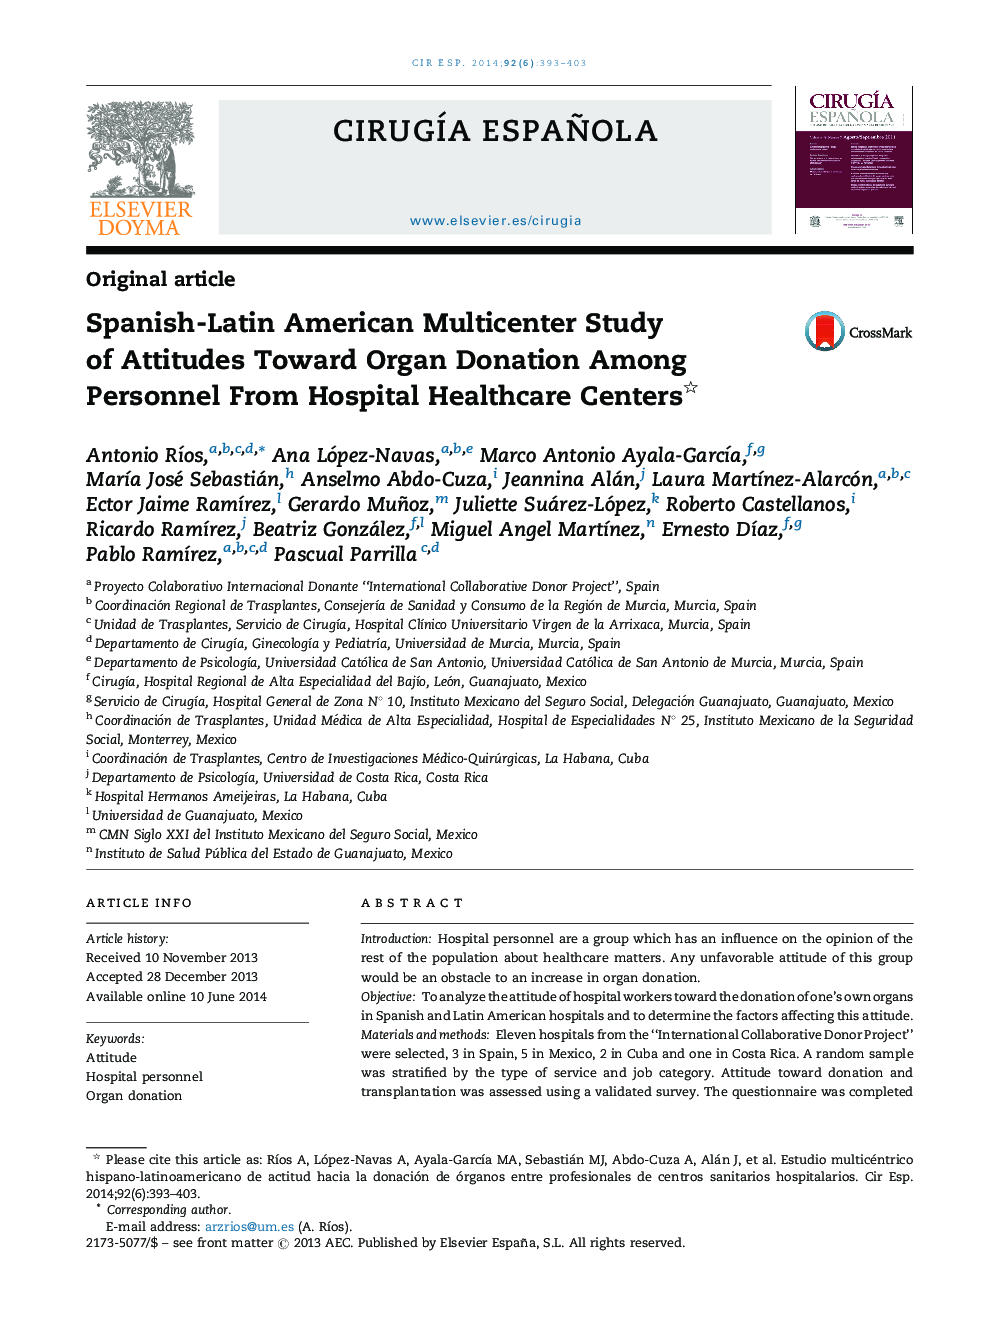 Spanish-Latin American Multicenter Study of Attitudes Toward Organ Donation Among Personnel From Hospital Healthcare Centers 